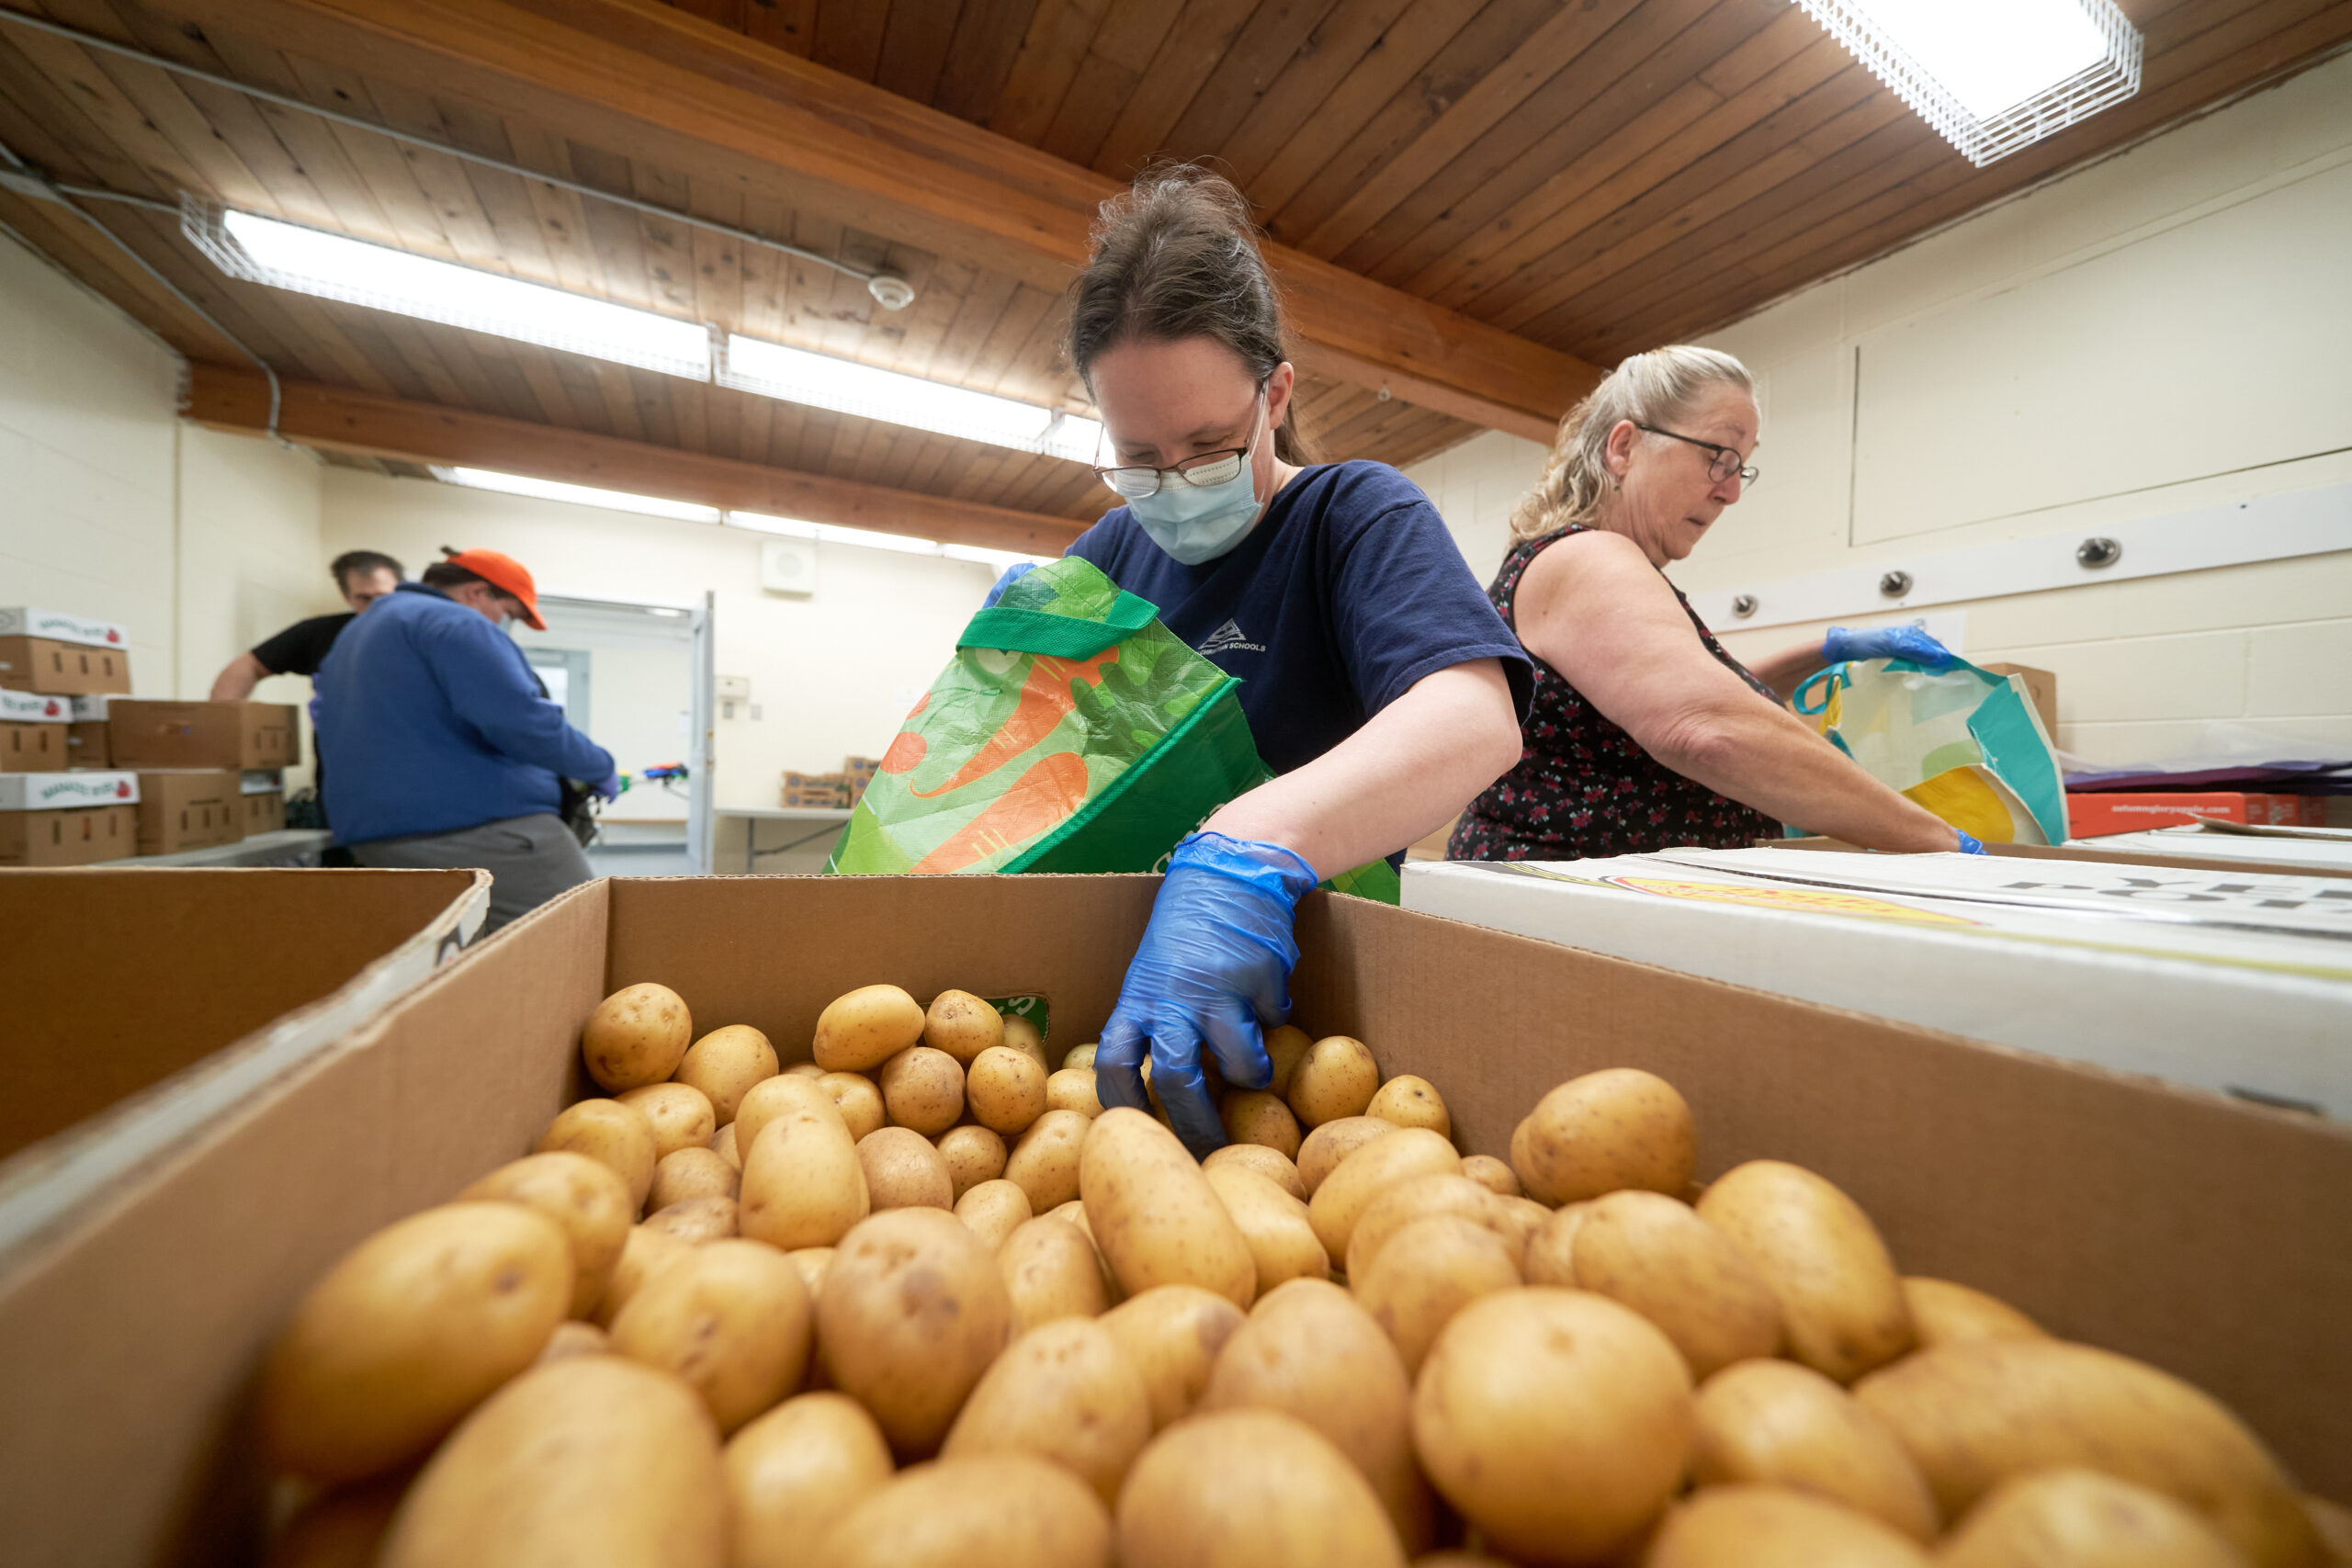 A woman in a blue shirt wearing glasses and a mask reaches a gloved hand into a box of potatoes.